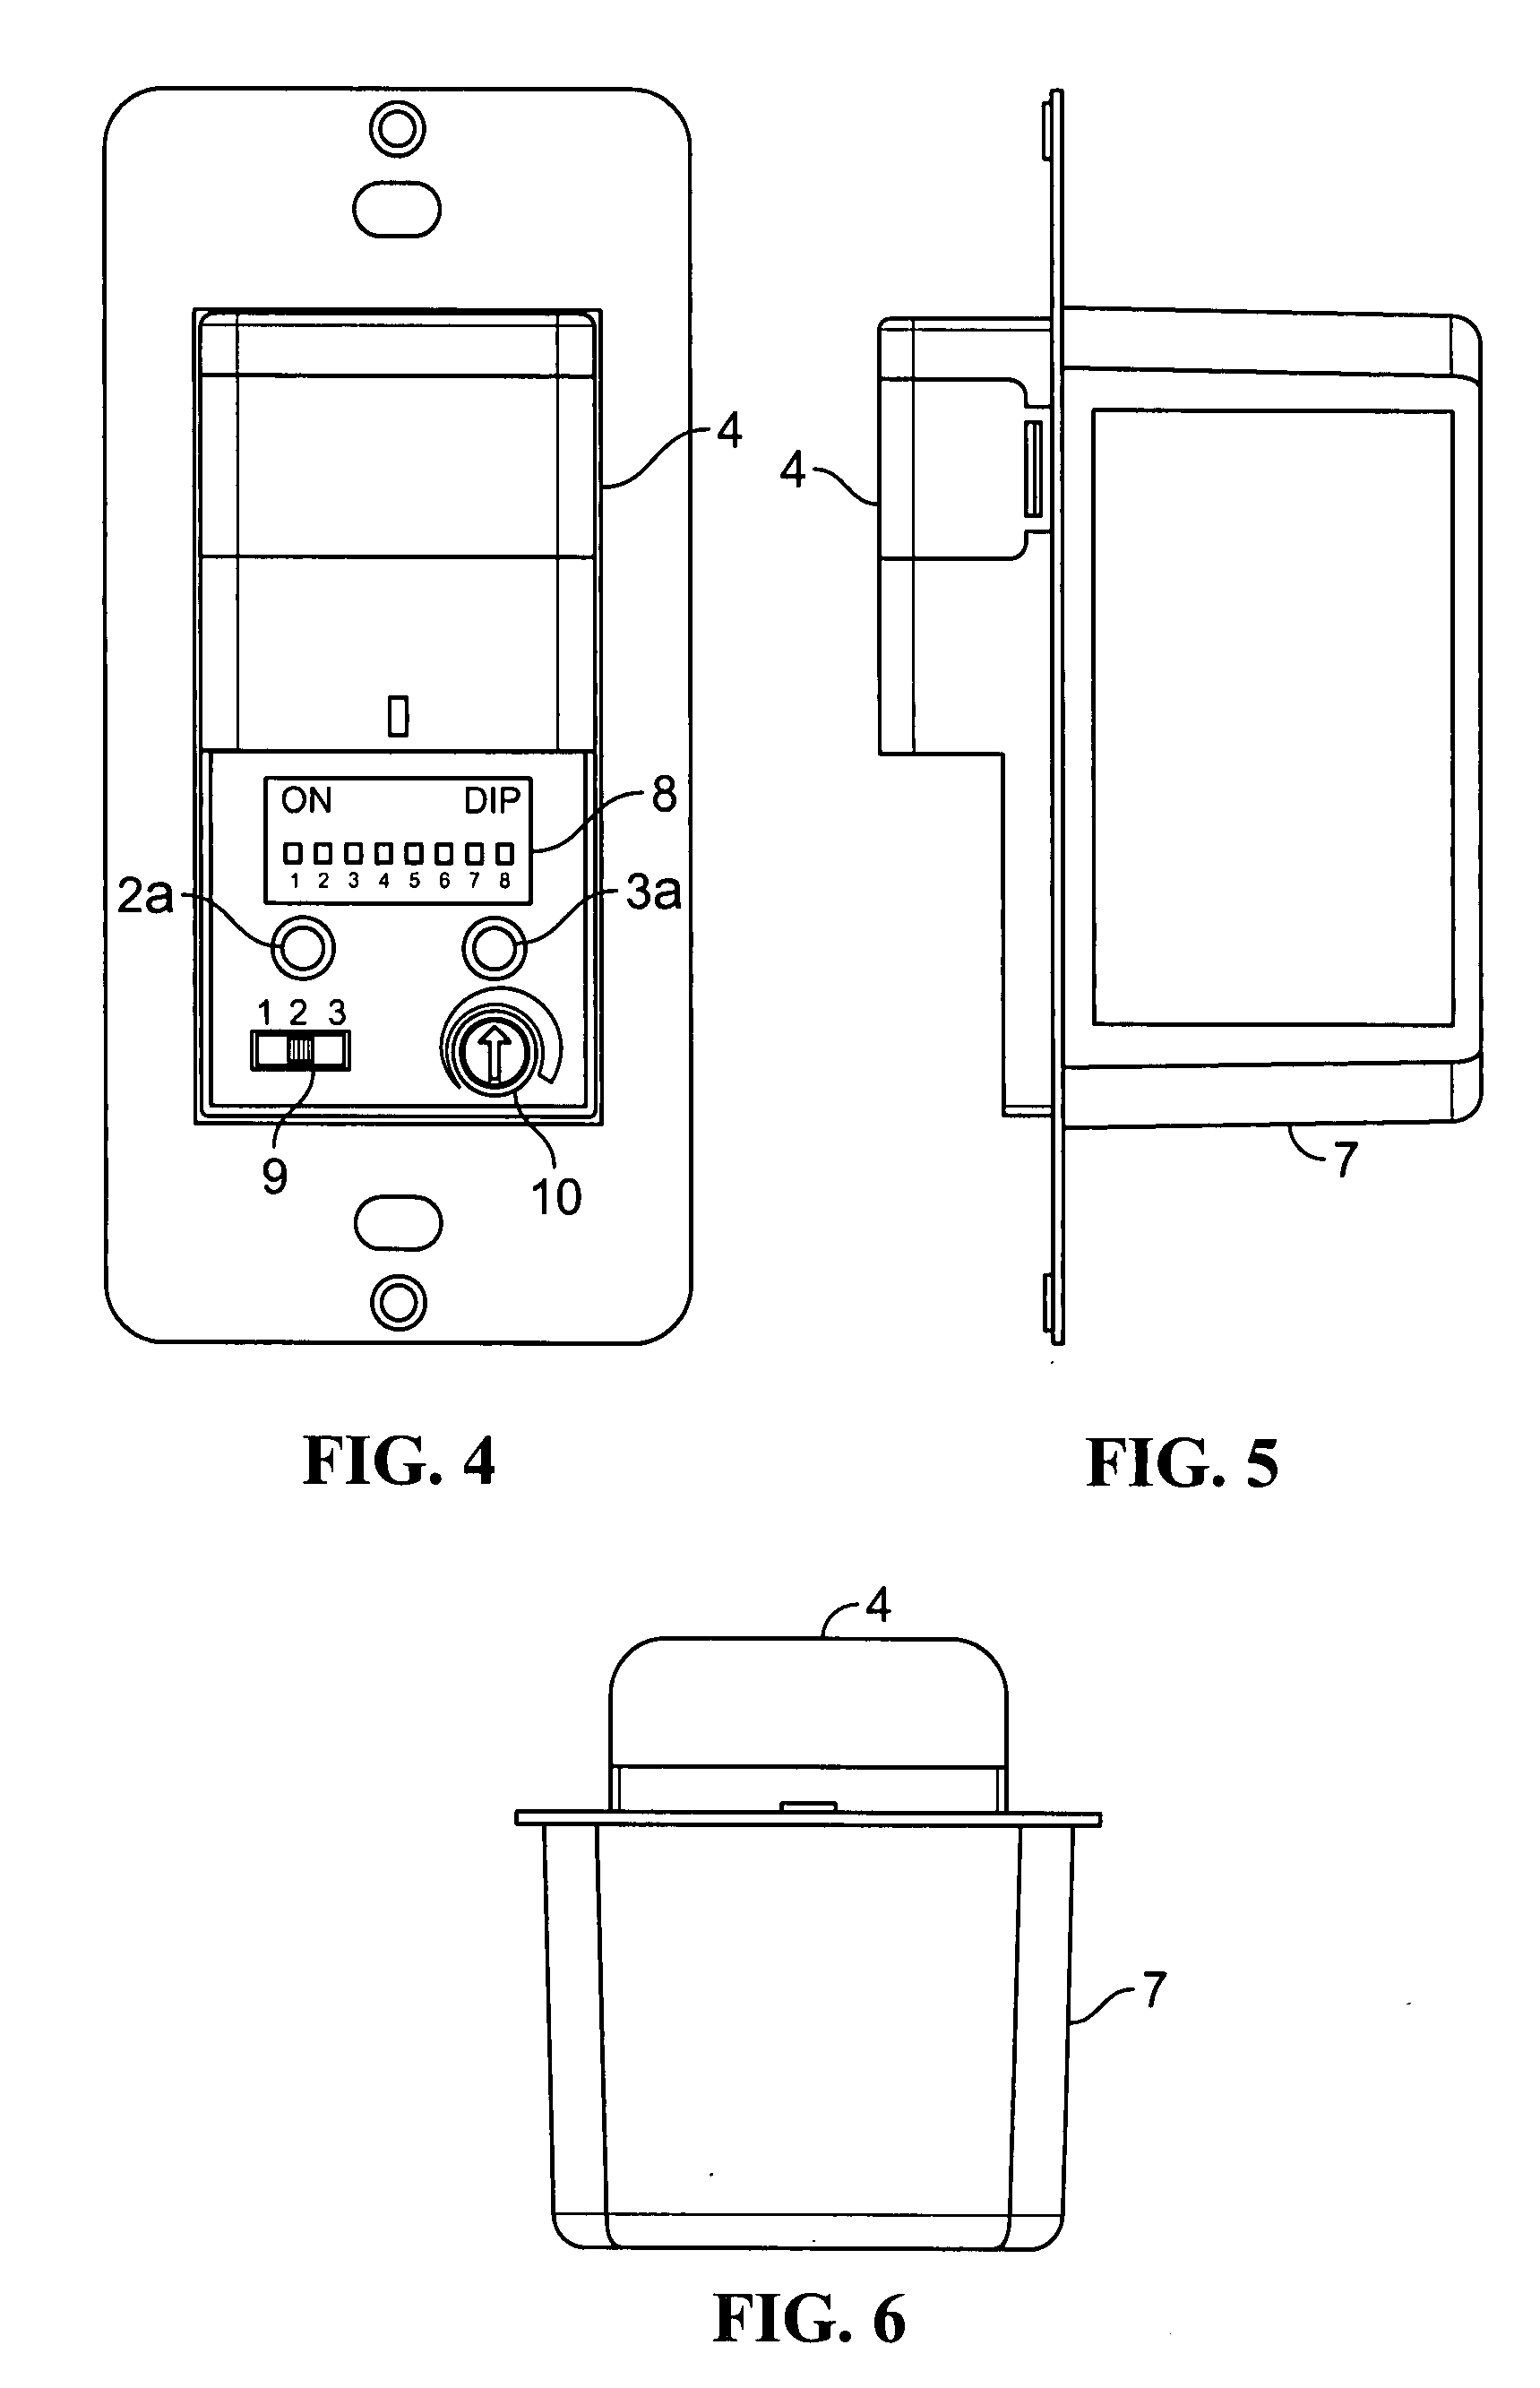 Wall switch for lighting load management system for lighting systems having multiple power circuits